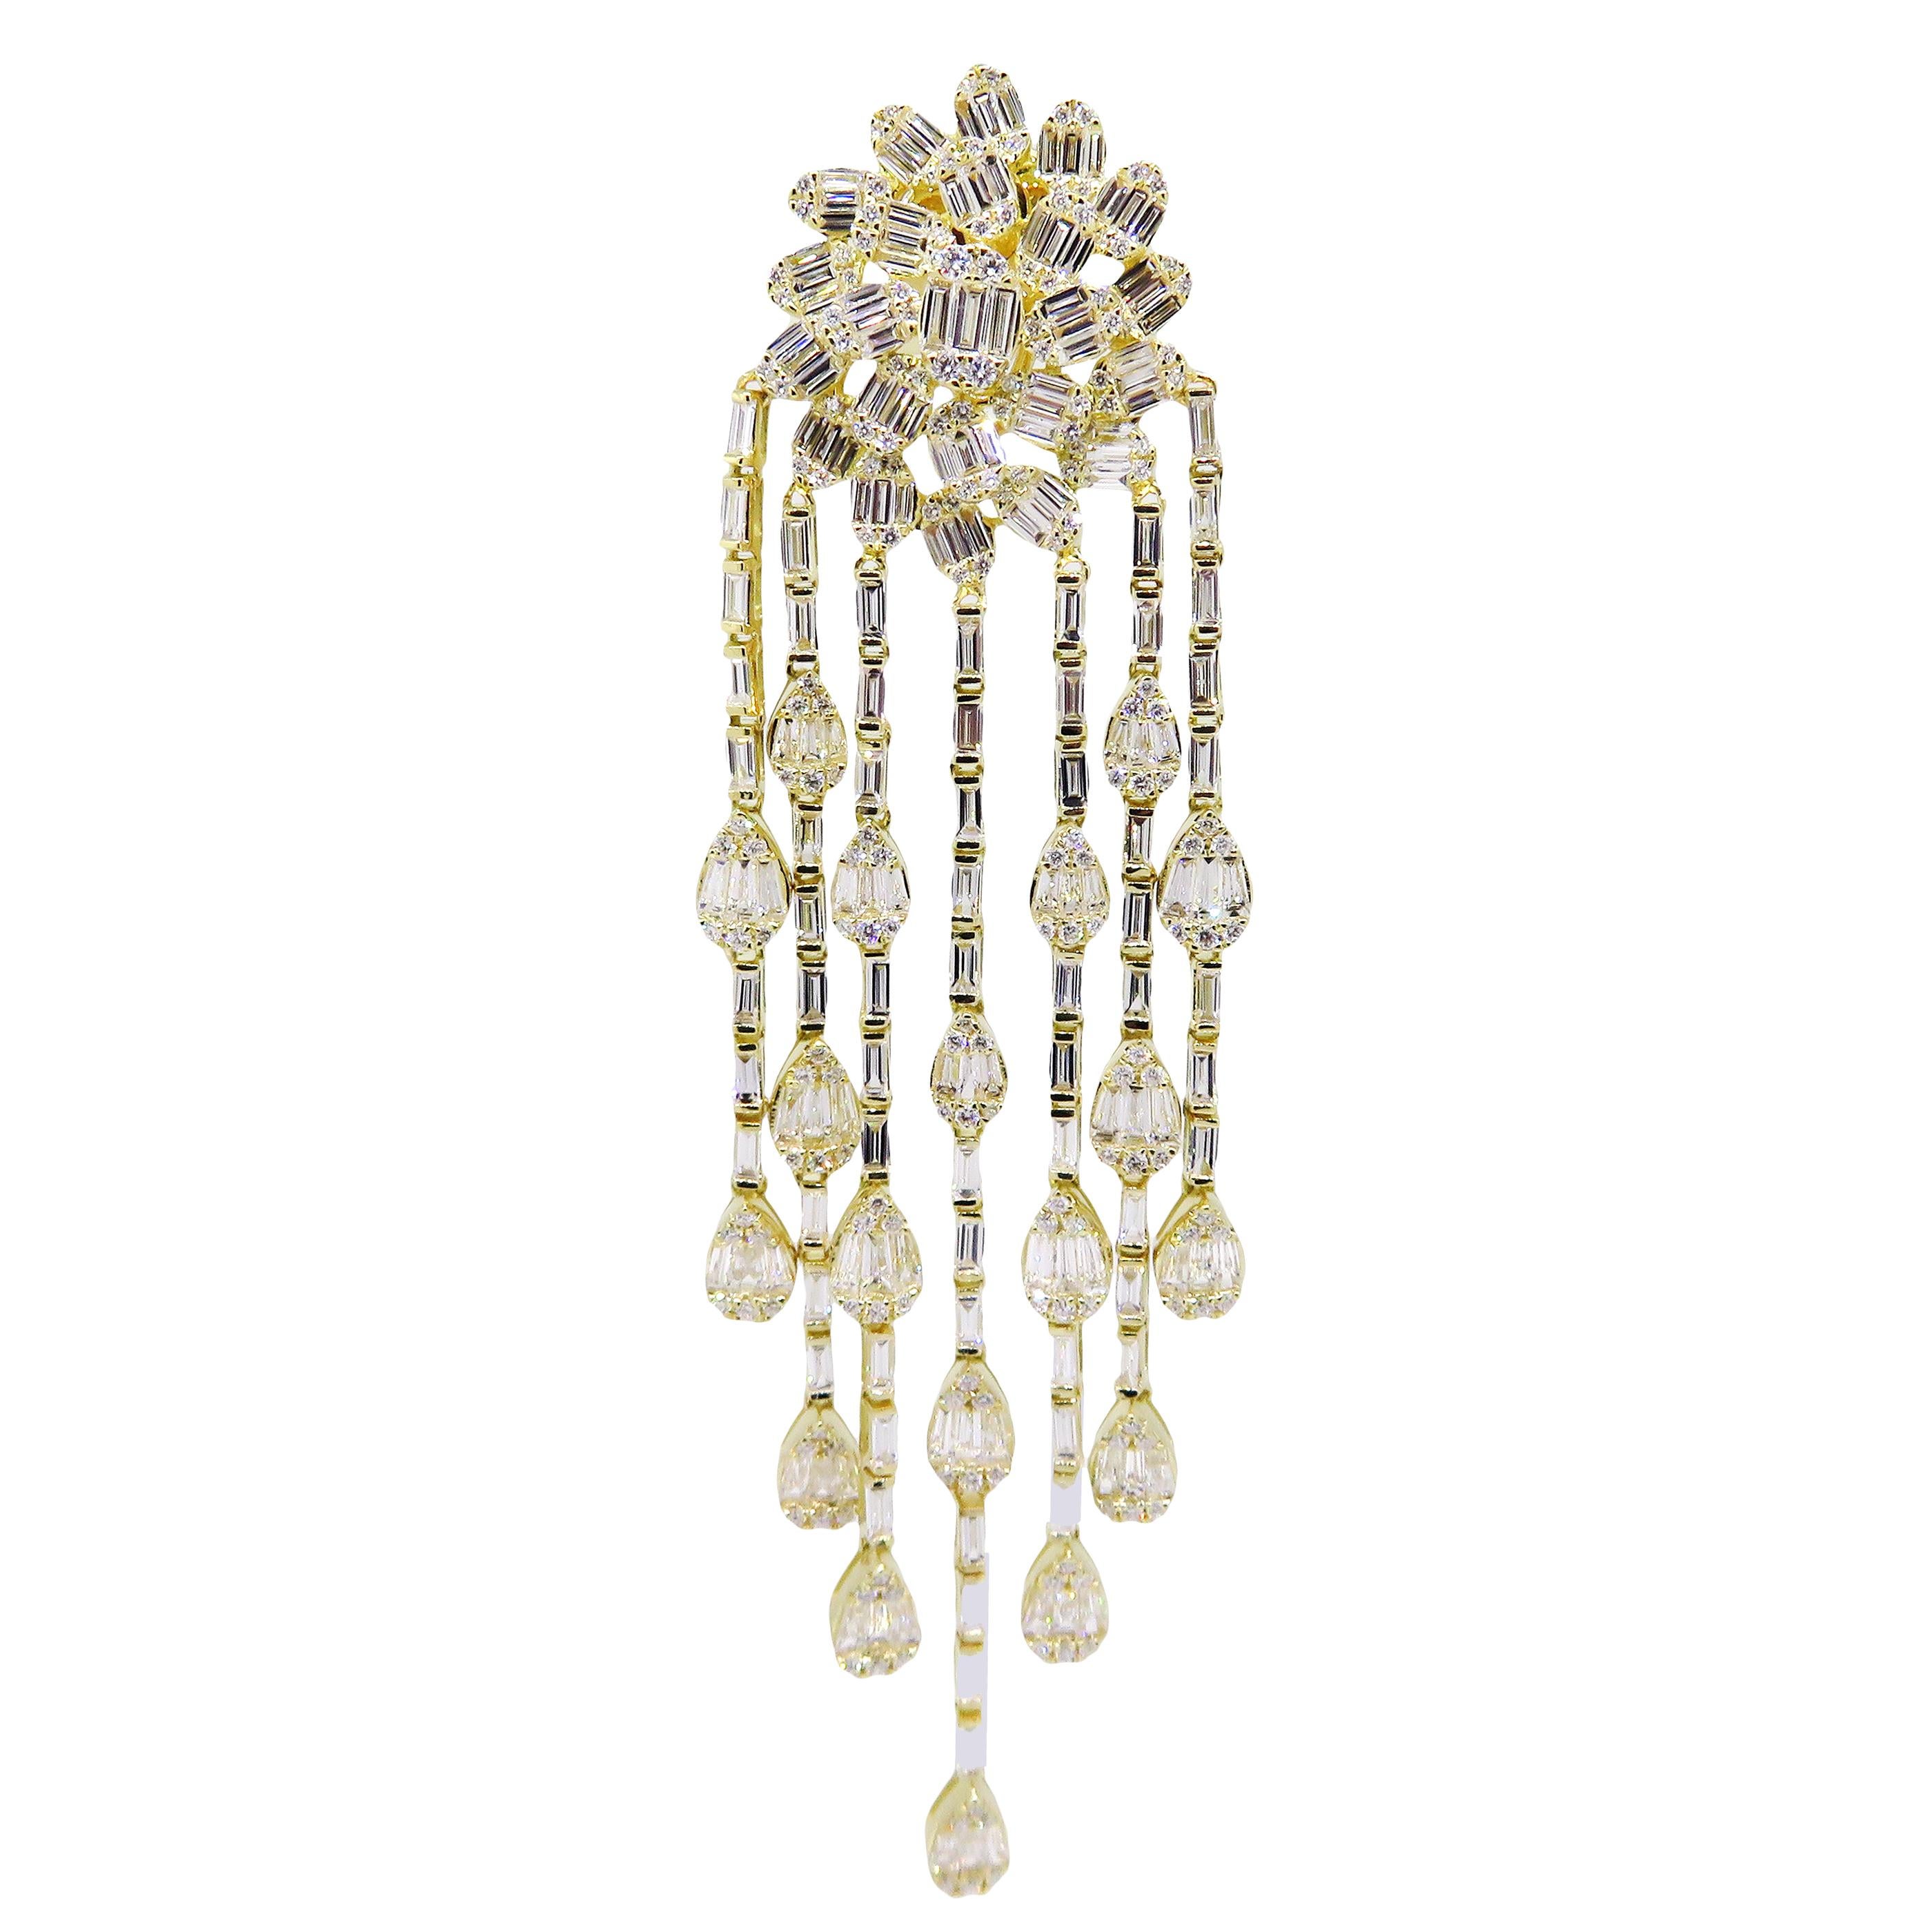 These oval burst chandelier earrings are crafted in 18-karat yellow gold, weighing approximately 11.97 total carats of SI-V Quality white diamond. Post-Style backing. 

Our Ballroom Chandelier Collection feature earrings for those with bold/classy